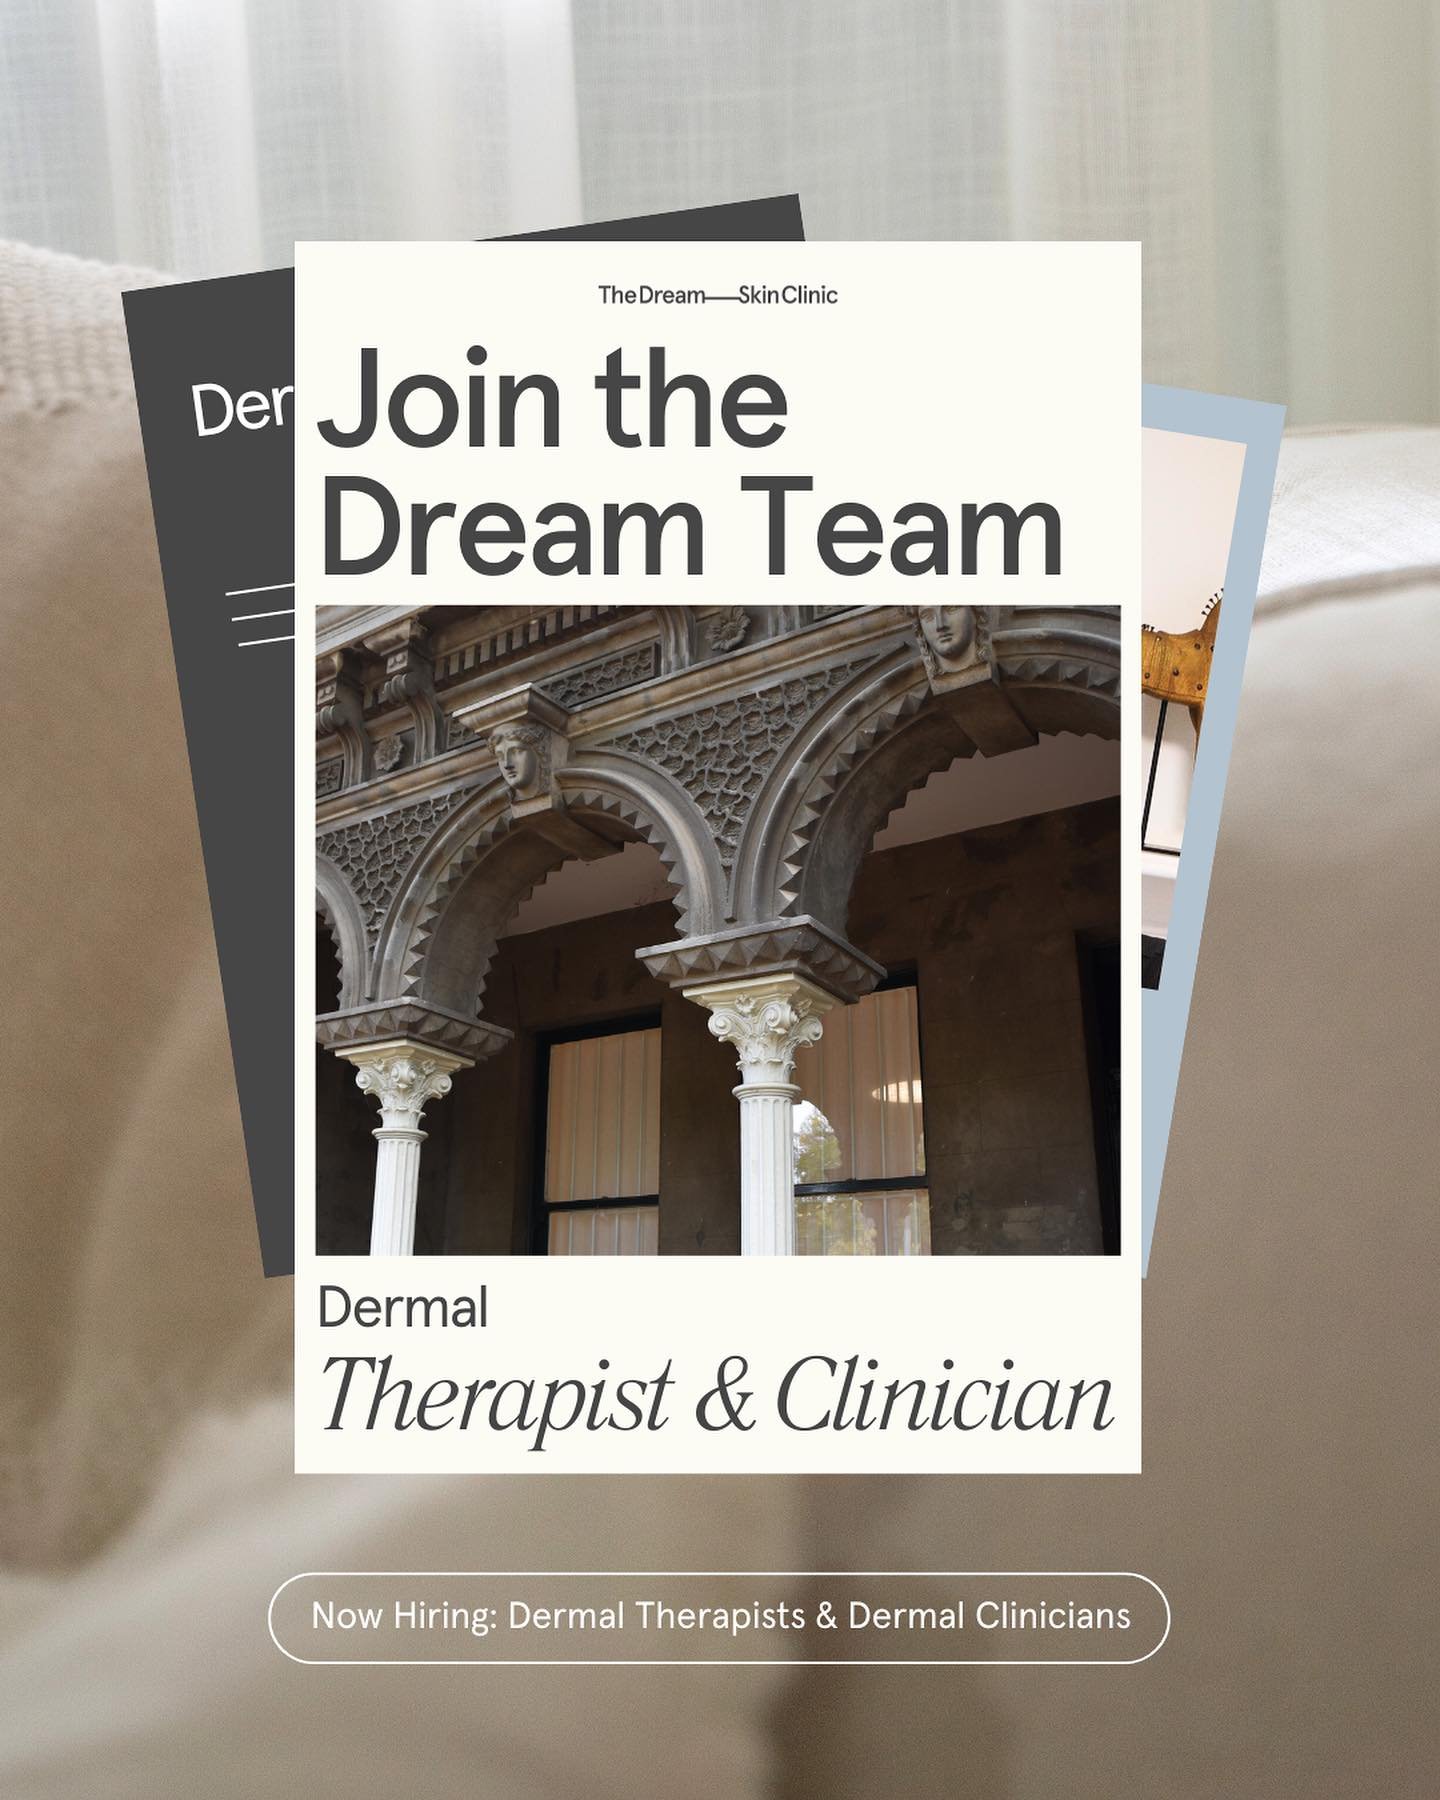 Join the Dream Team!

Are you genuinely passionate about skin and want to create life-changing transformations? If so, we&rsquo;d like to extend an invitation for YOU to join our exclusive team here at The Dream Skin Clinic!

Please send your cover l